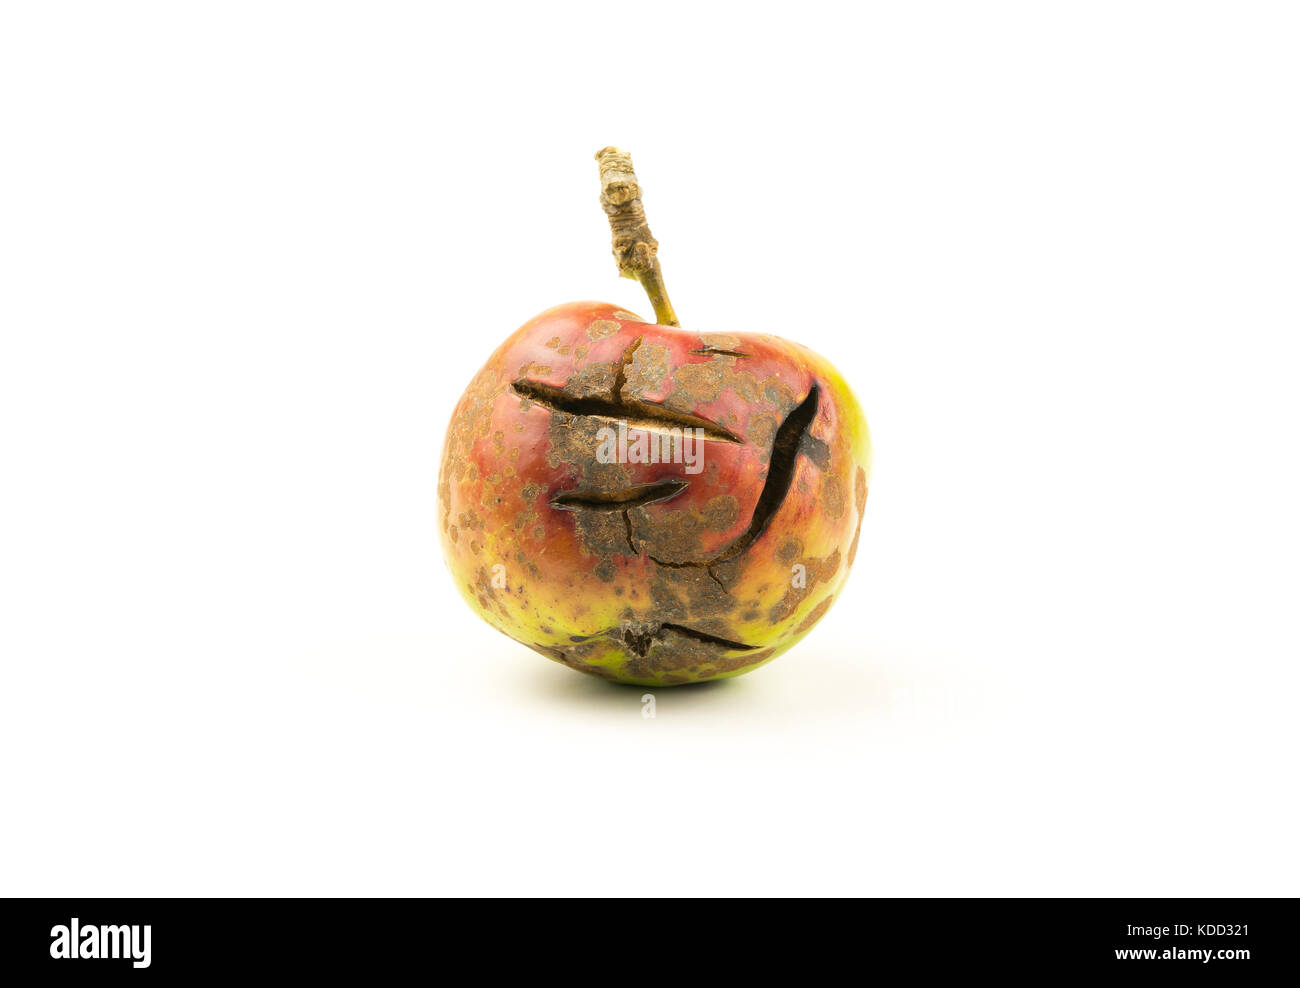 Cracked apple on a white background with text space. Forbidden fruit / unhealthy diet concept Stock Photo